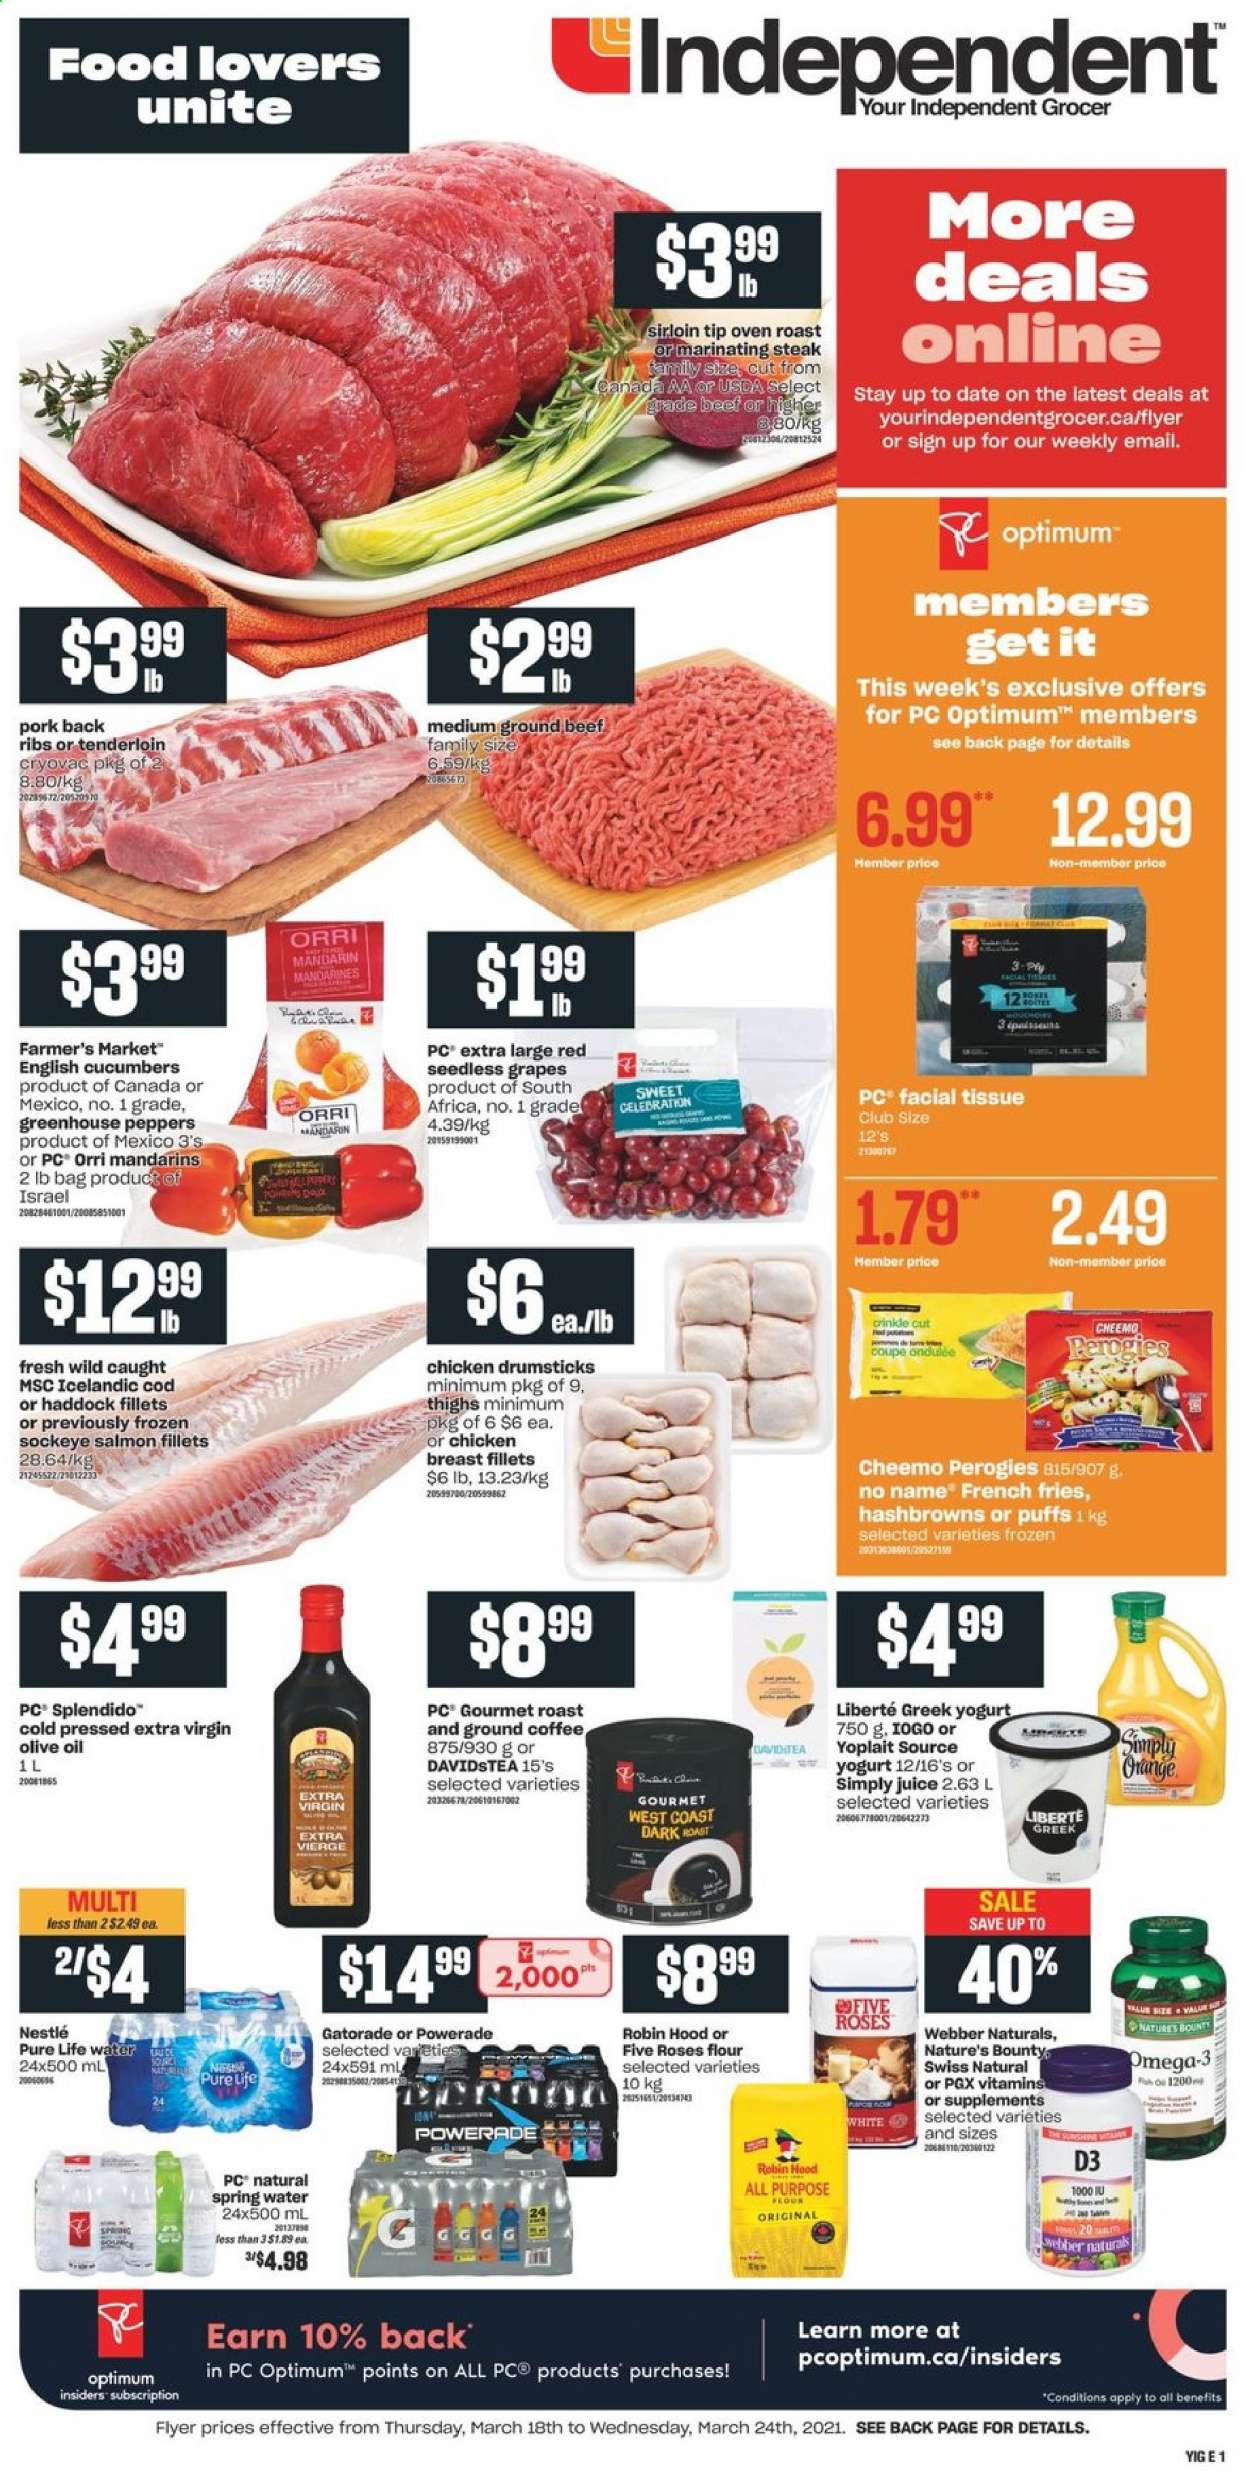 thumbnail - Independent Flyer - March 18, 2021 - March 24, 2021 - Sales products - puffs, cucumber, peppers, grapes, mandarines, seedless grapes, cod, salmon, salmon fillet, haddock, No Name, greek yoghurt, yoghurt, Yoplait, hash browns, potato fries, french fries, Celebration, flour, extra virgin olive oil, olive oil, oil, Powerade, juice, Gatorade, spring water, Pure Life Water, coffee, ground coffee, chicken breasts, chicken drumsticks, chicken, beef meat, ground beef, pork meat, pork ribs, pork back ribs, tissues, Optimum, Nature's Bounty, Omega-3, vitamin D3, Nestlé, steak. Page 1.